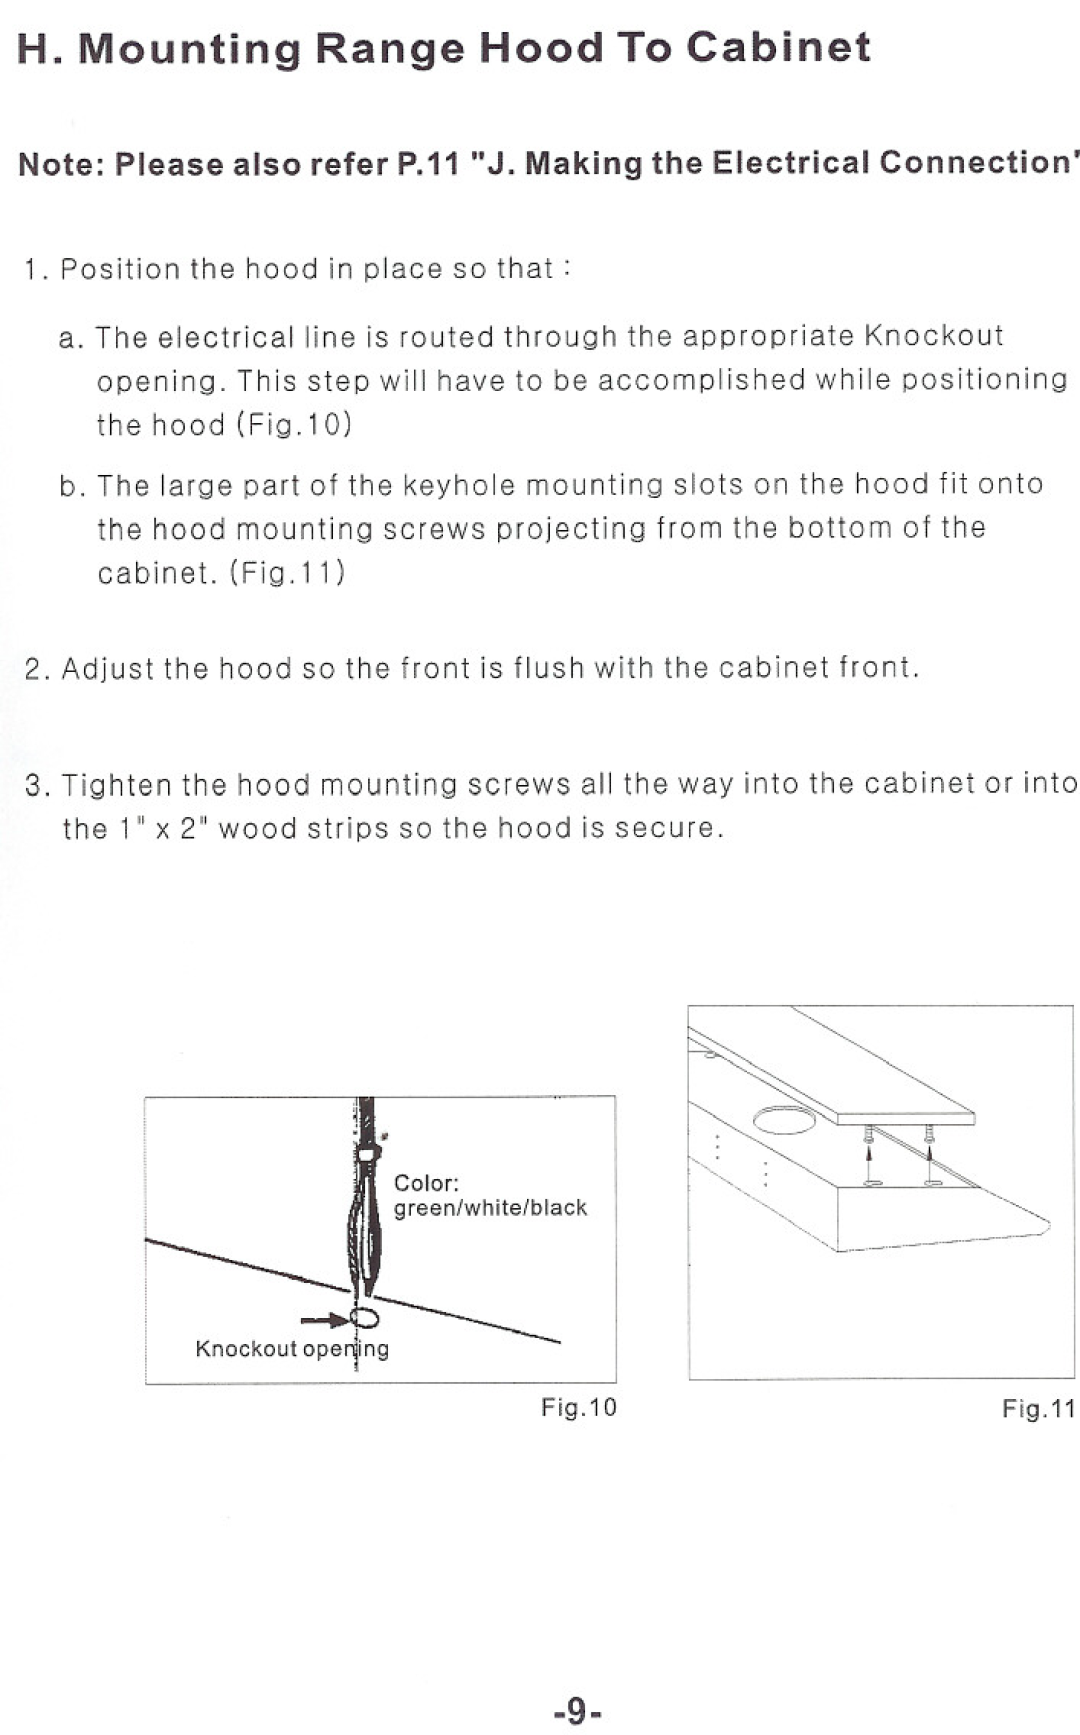 Windster RA.3130/3136, RA.3030/3036 operation manual H. Mounting Range Hood To Cabinet, Fig.1 